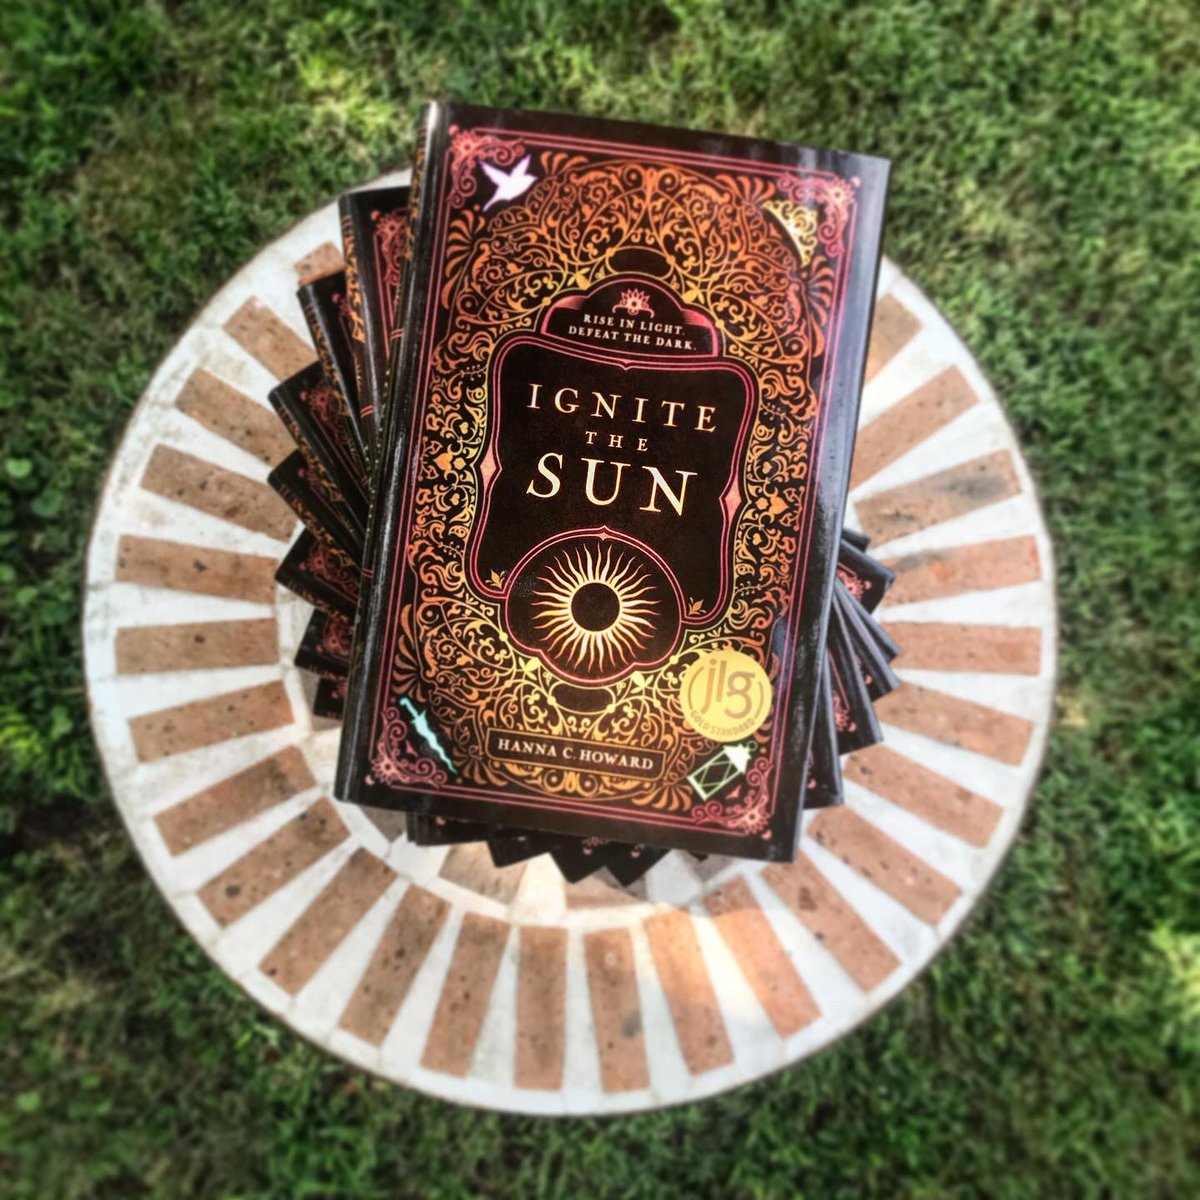 This completely wild and surreal thing happened yesterday. 🌞📖 #roaring20sdebut #ignitethesun @BlinkYABooks @HarperCollins